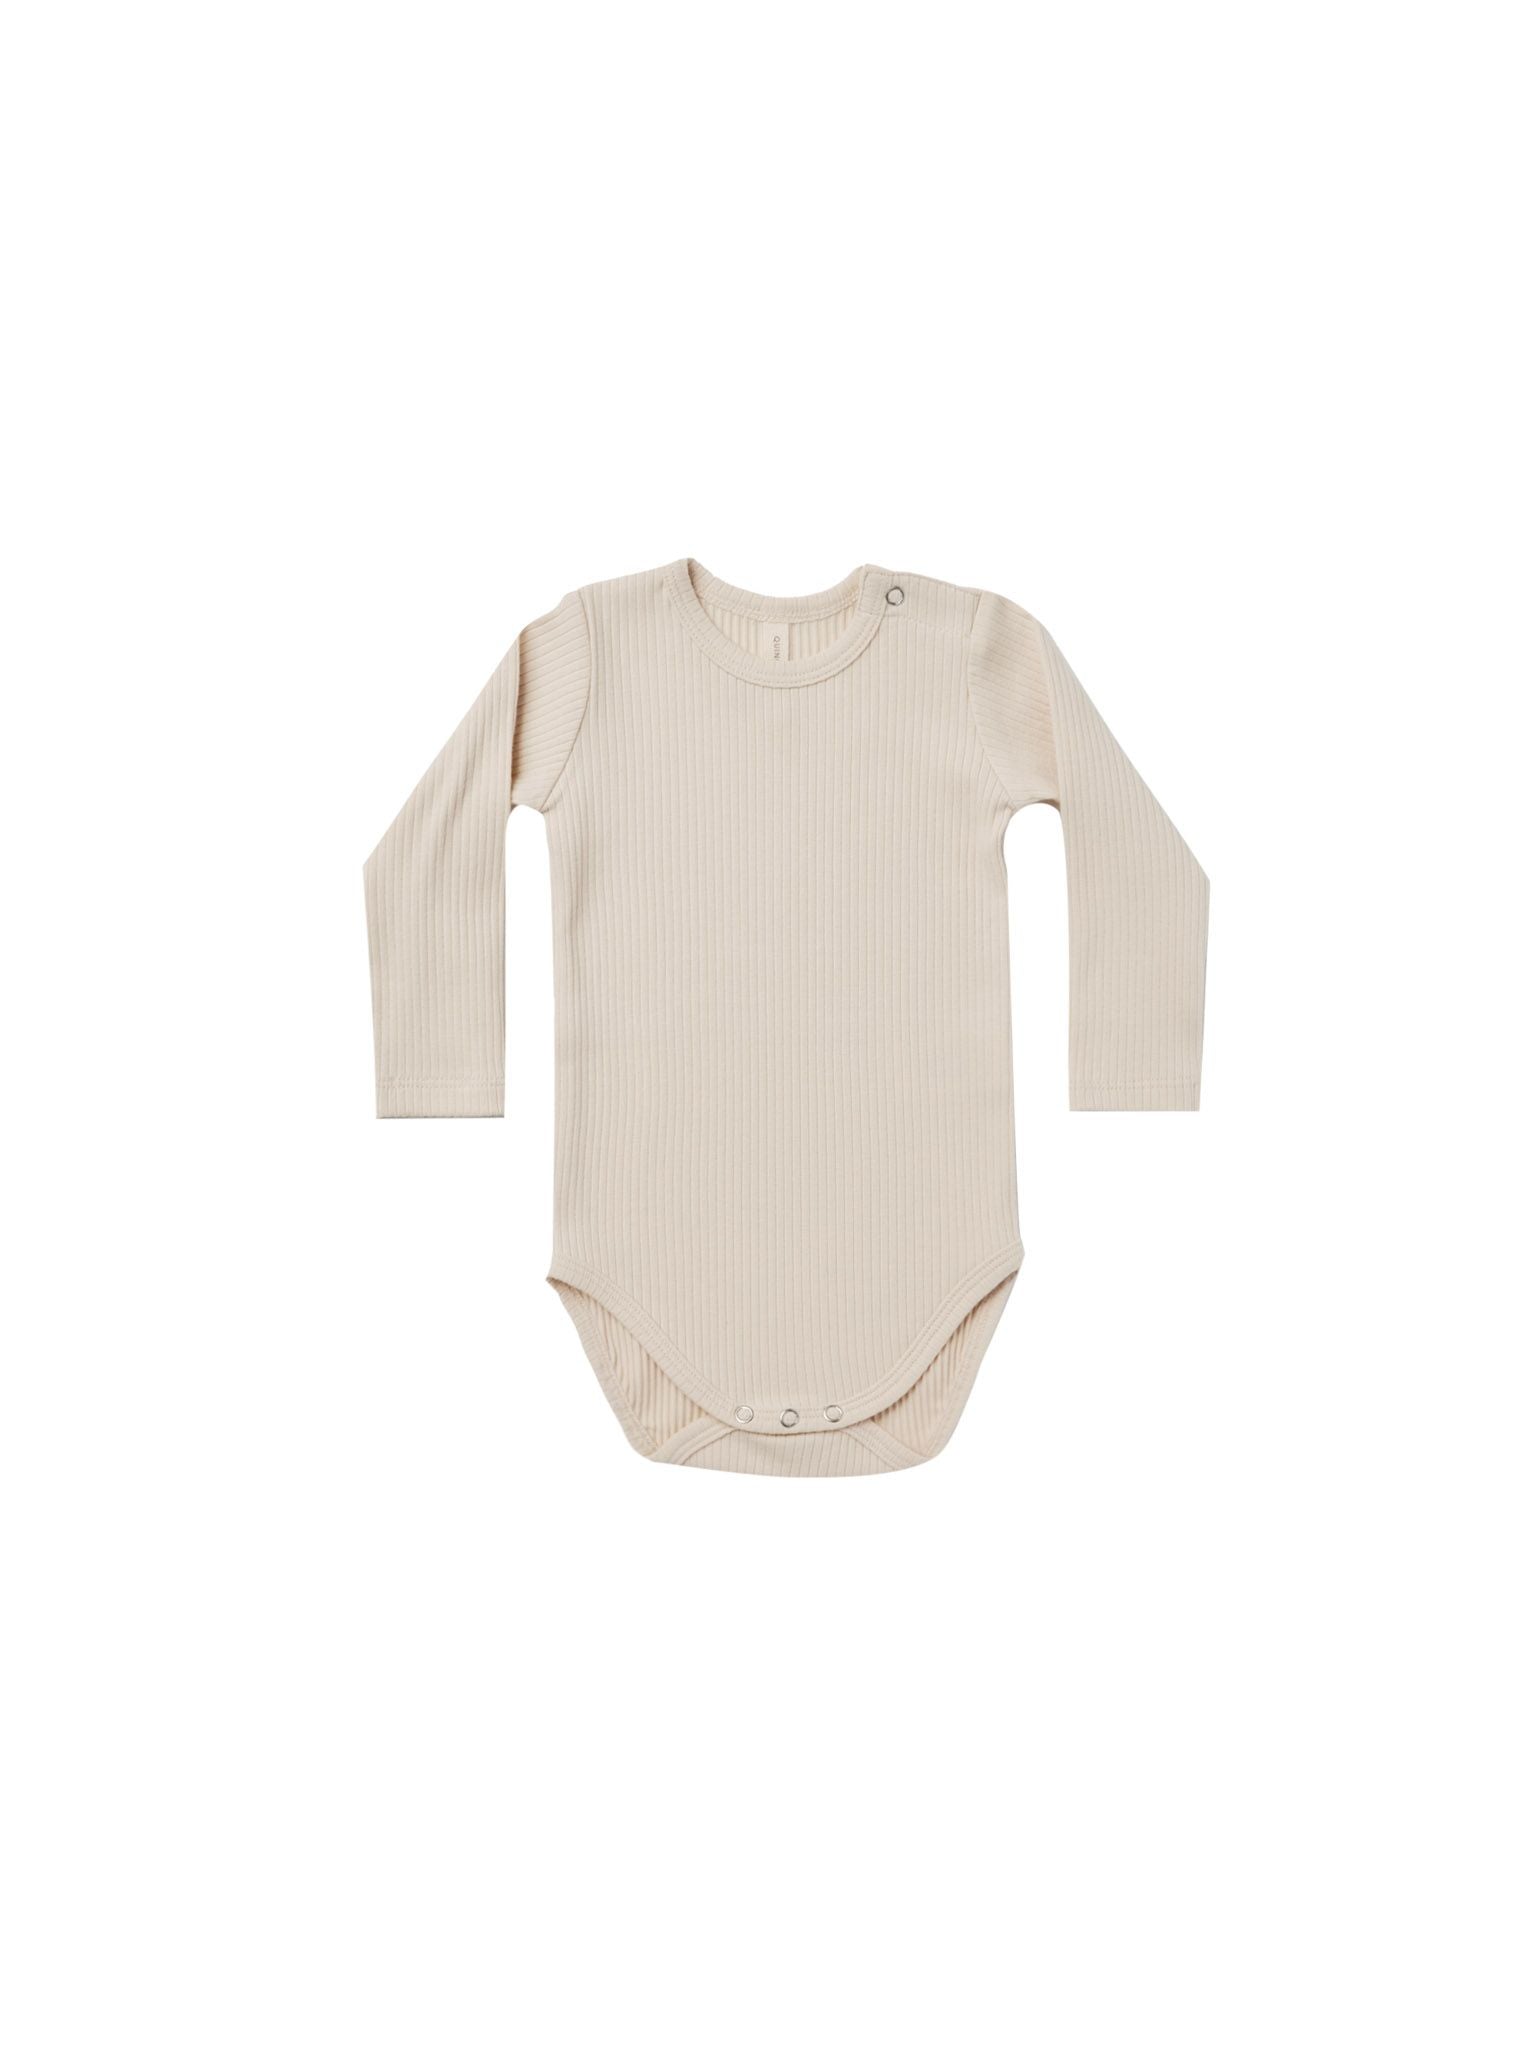 ribbed long sleeve bodysuit | natural - LAST ONE NB